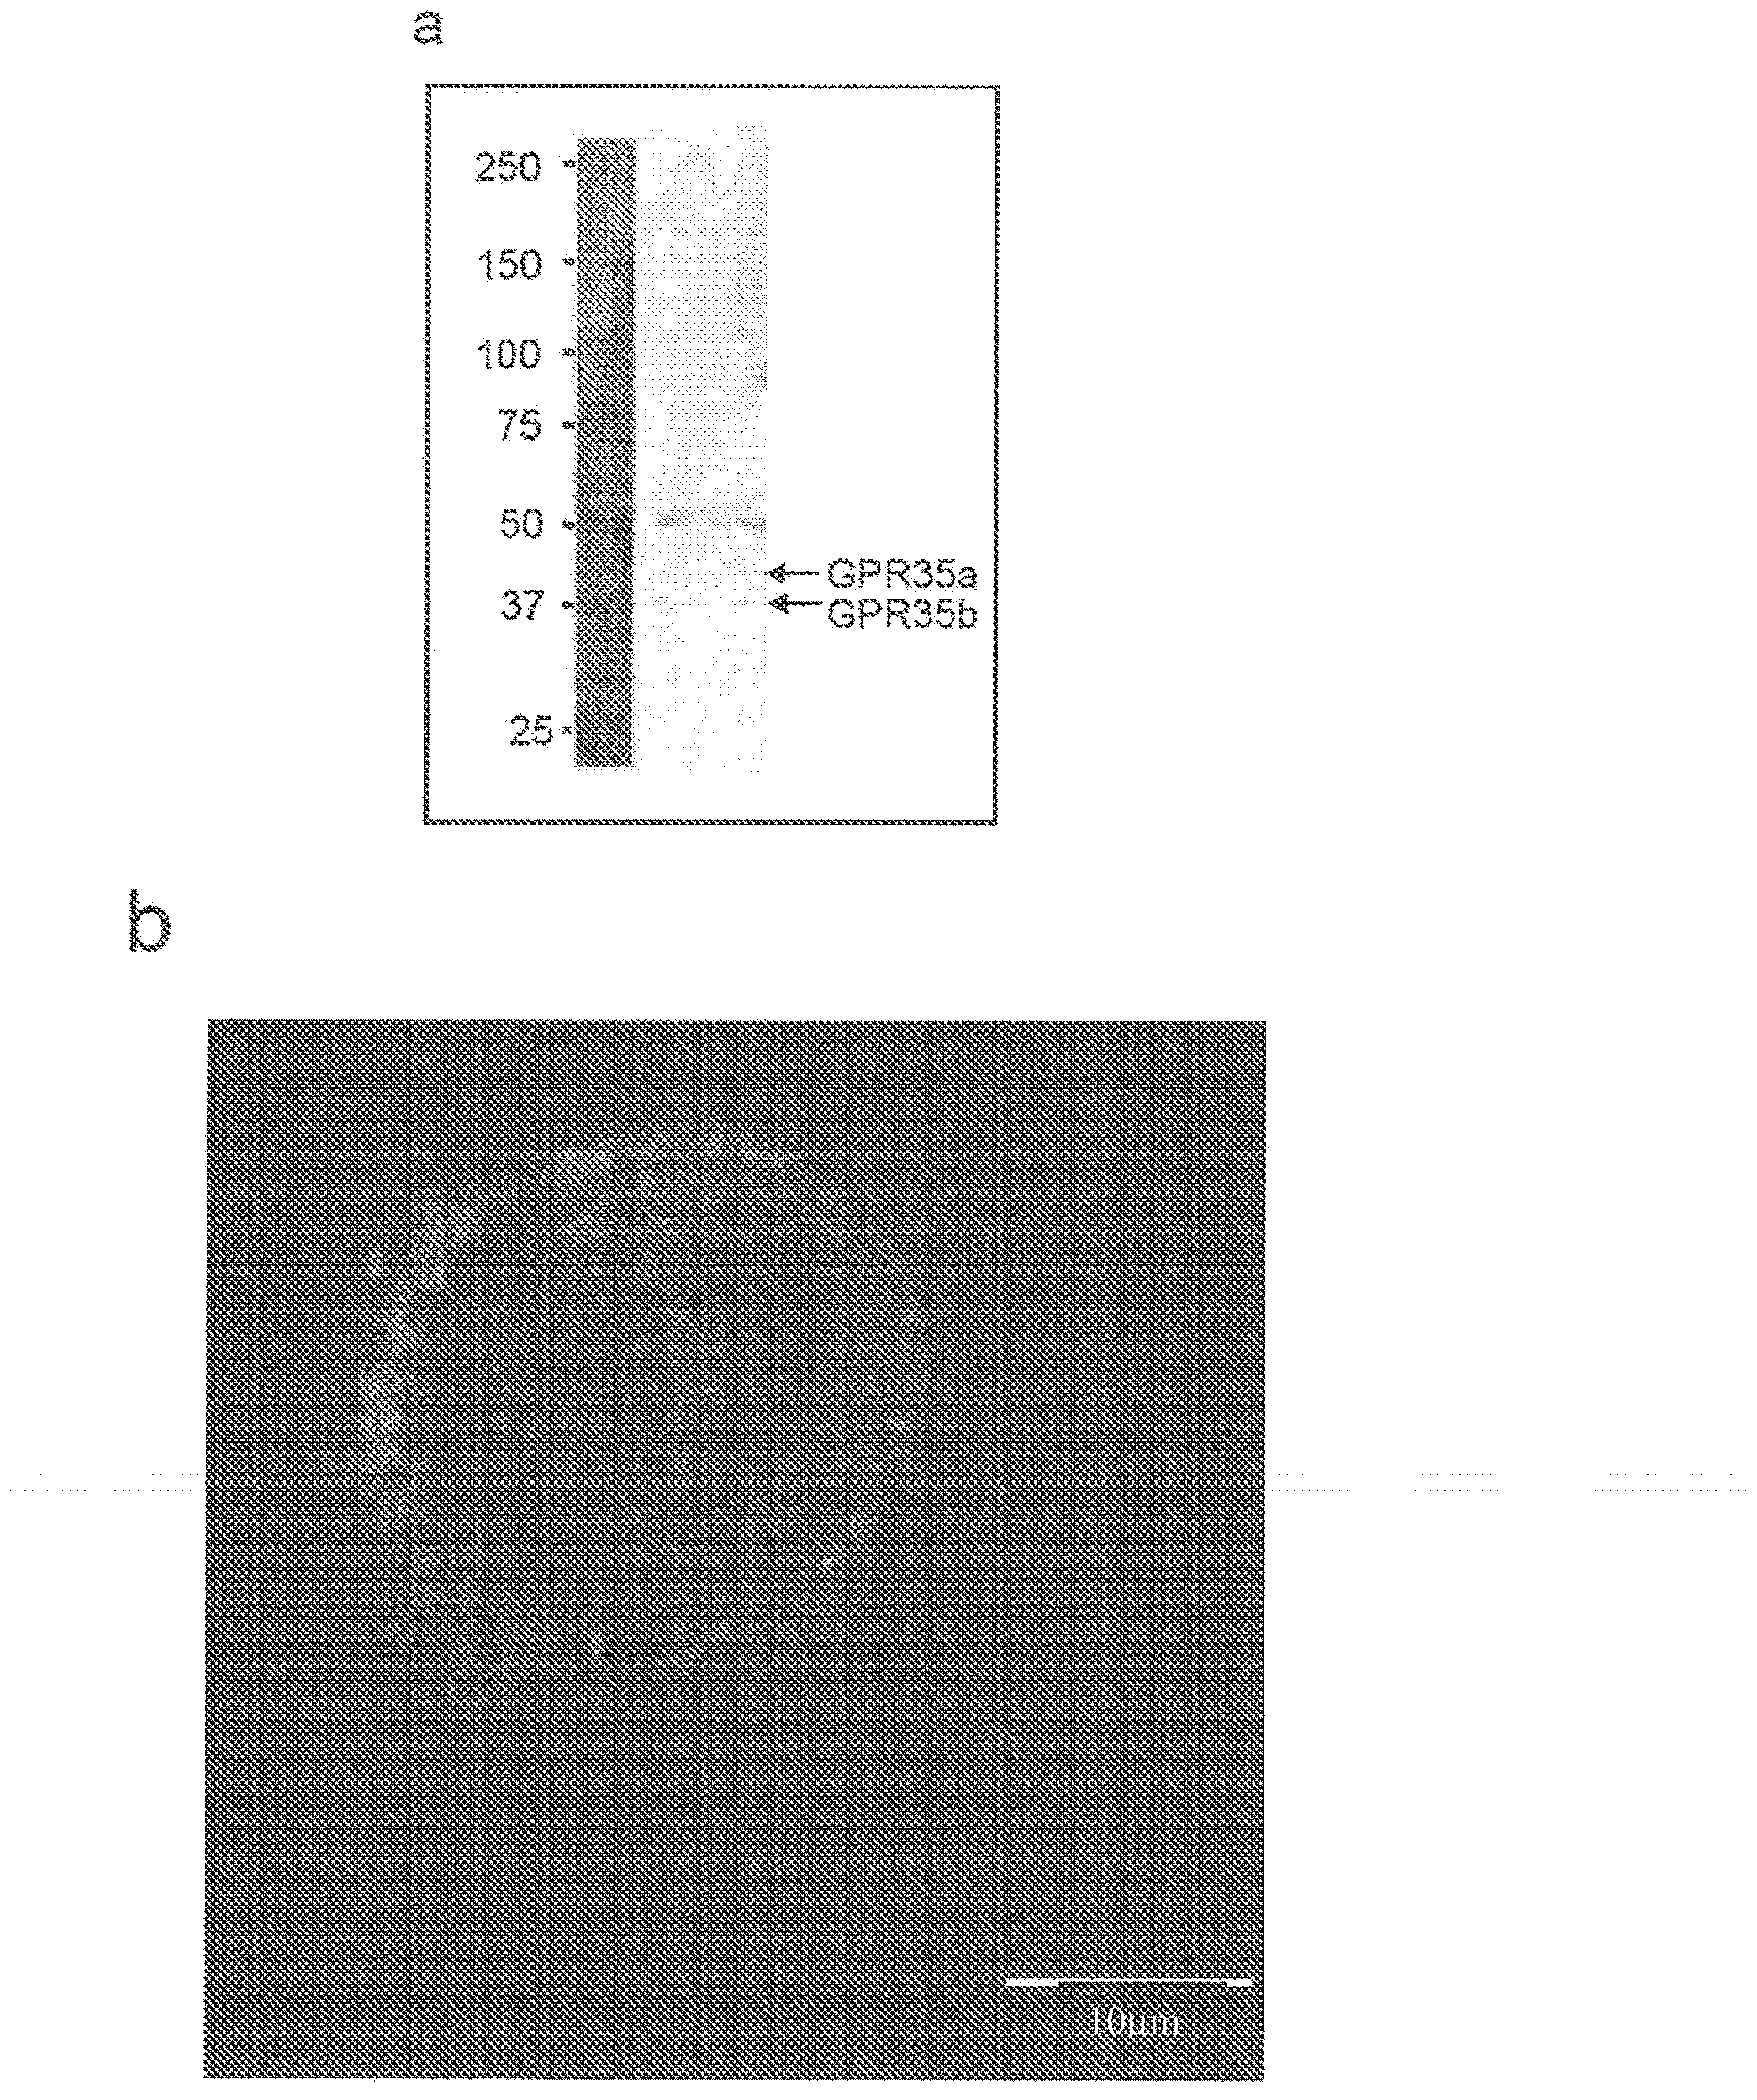 Compositions and methods for the treatment of pathological condition(s) related to GPR35 and/or GPR35-HERG complex